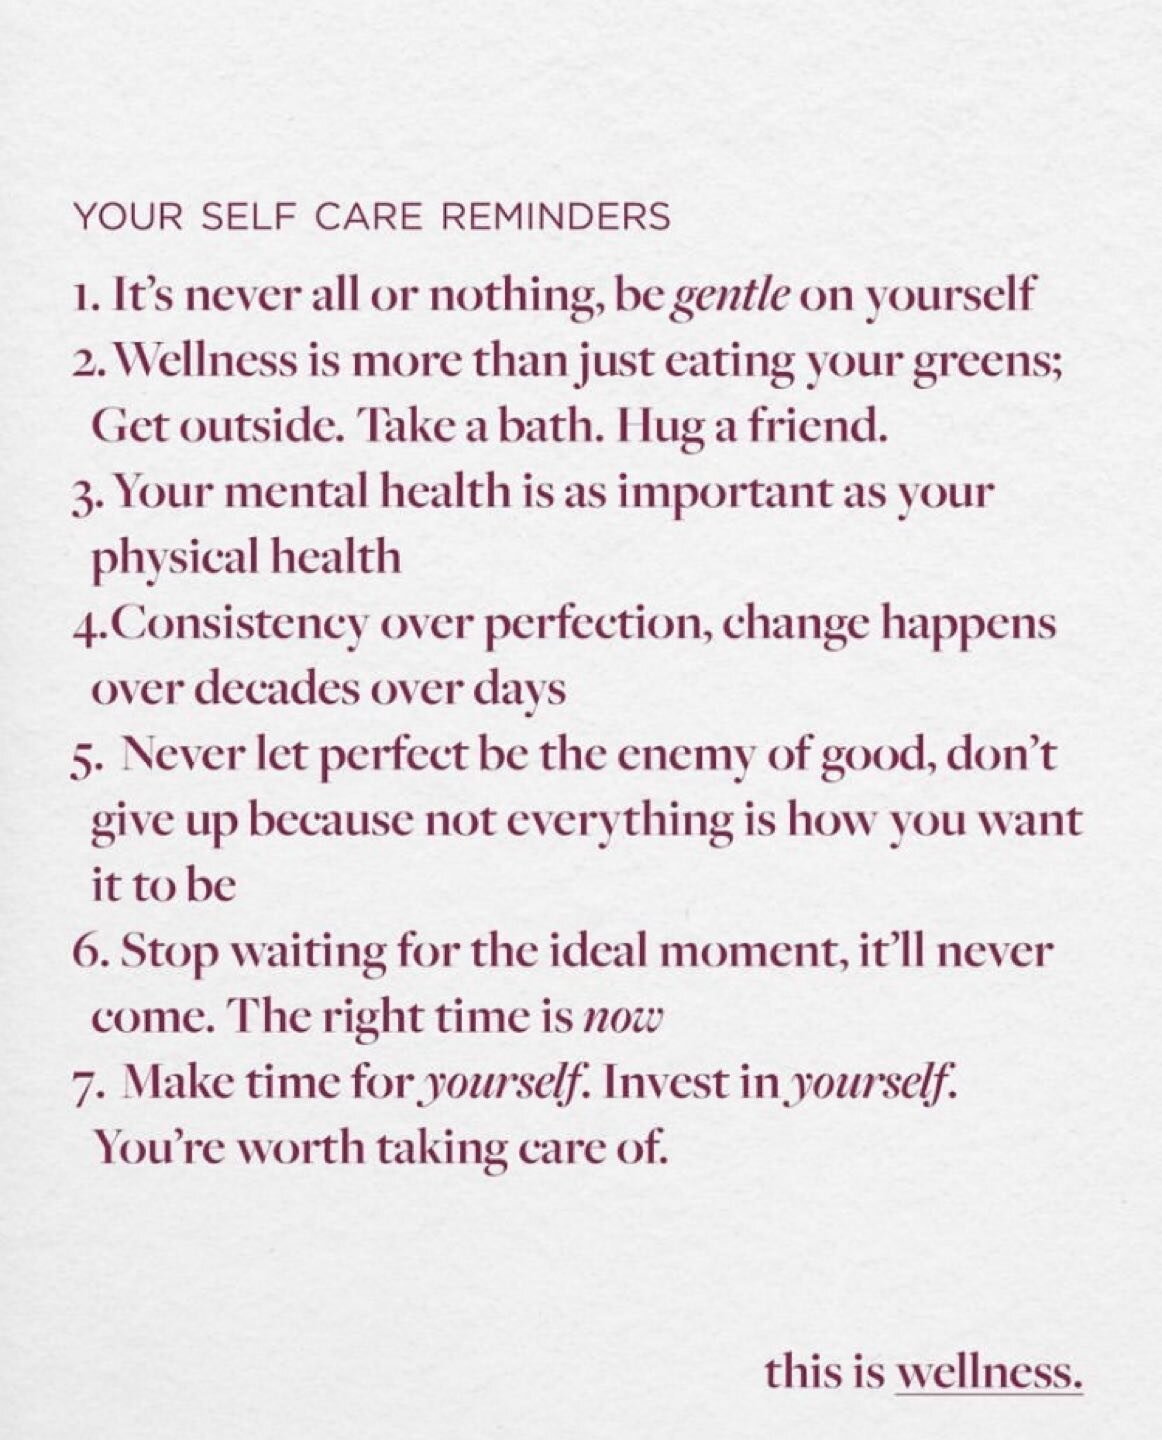 I saw this today @deliciouslyella and it made me reflect on how harshly we treat ourselves.  Take some time out to read and think about this then start putting it into action.  Be well, be happy, be mindful and be conscious 🫶🥰😊.